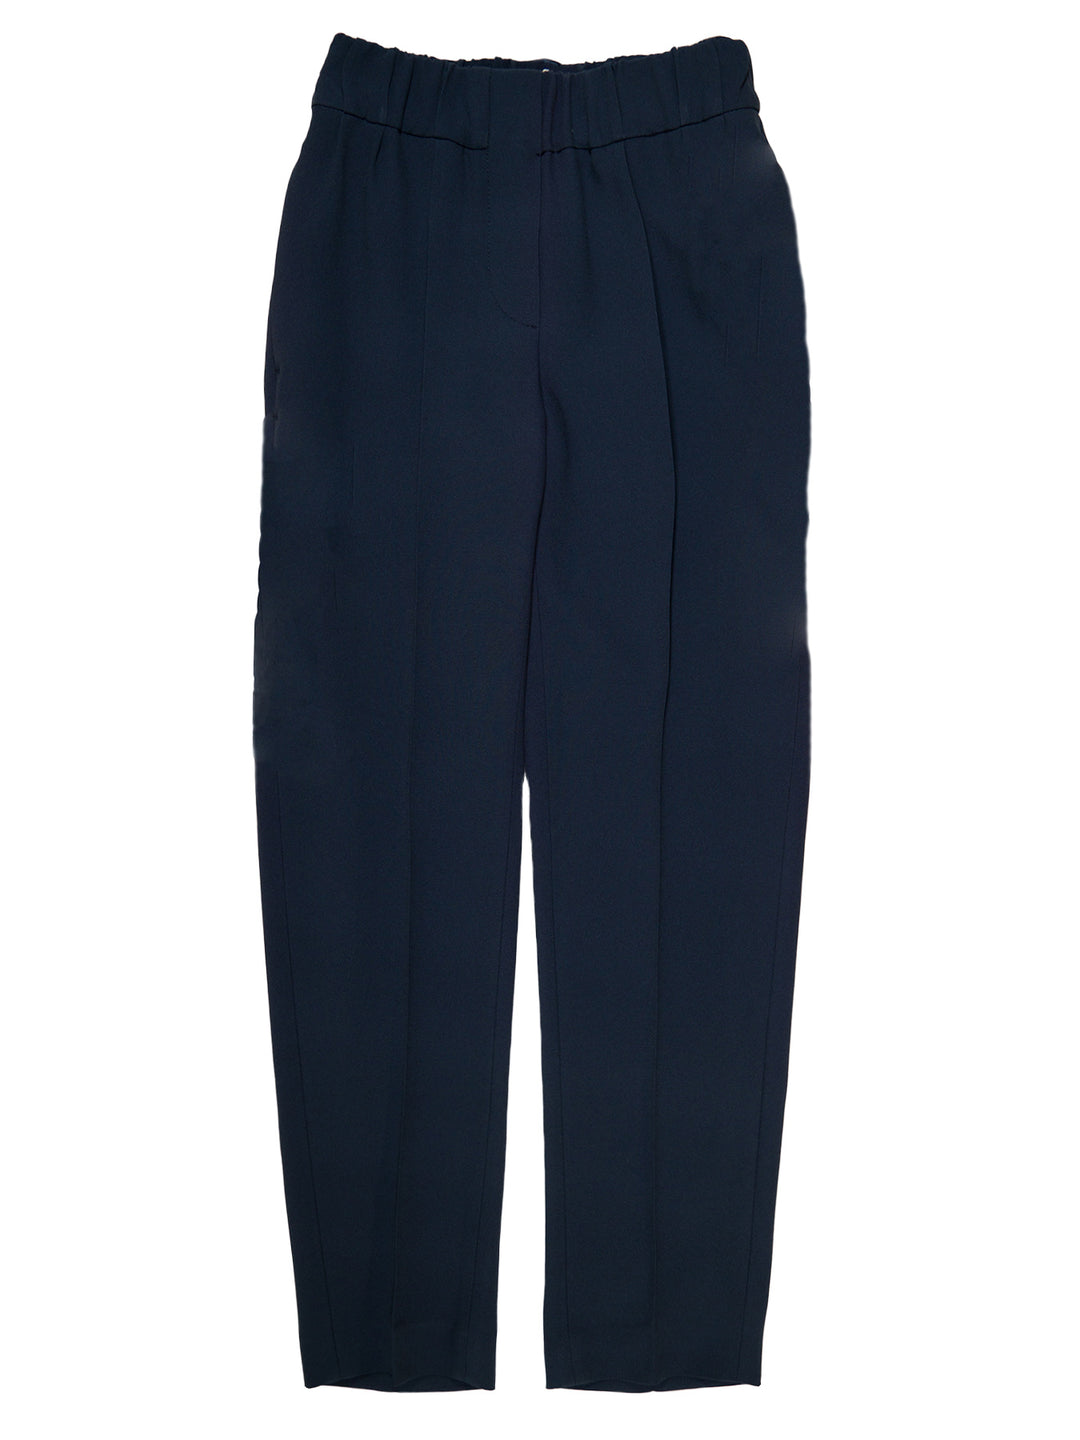 Brunello Cucinelli Cropped Pant in Nights